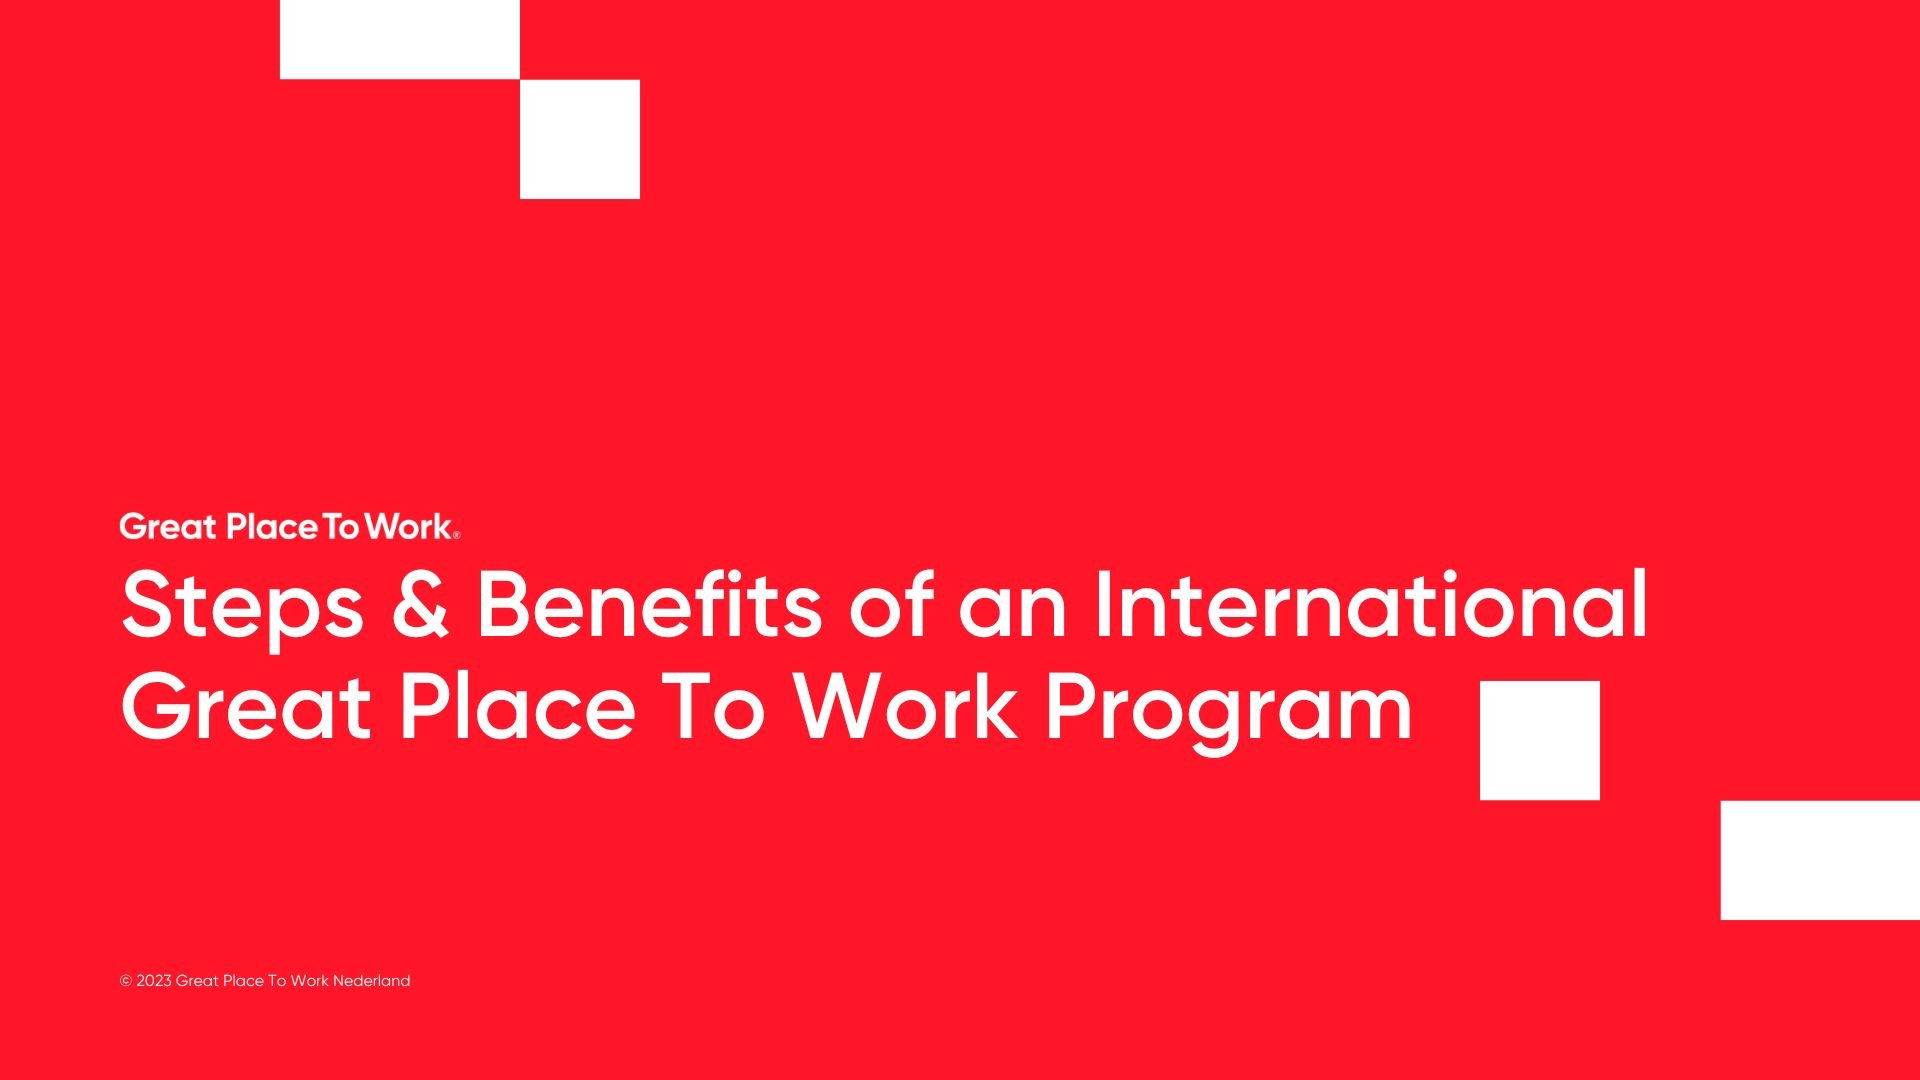 Steps and Benefits of an International Great Place To Work program 2023